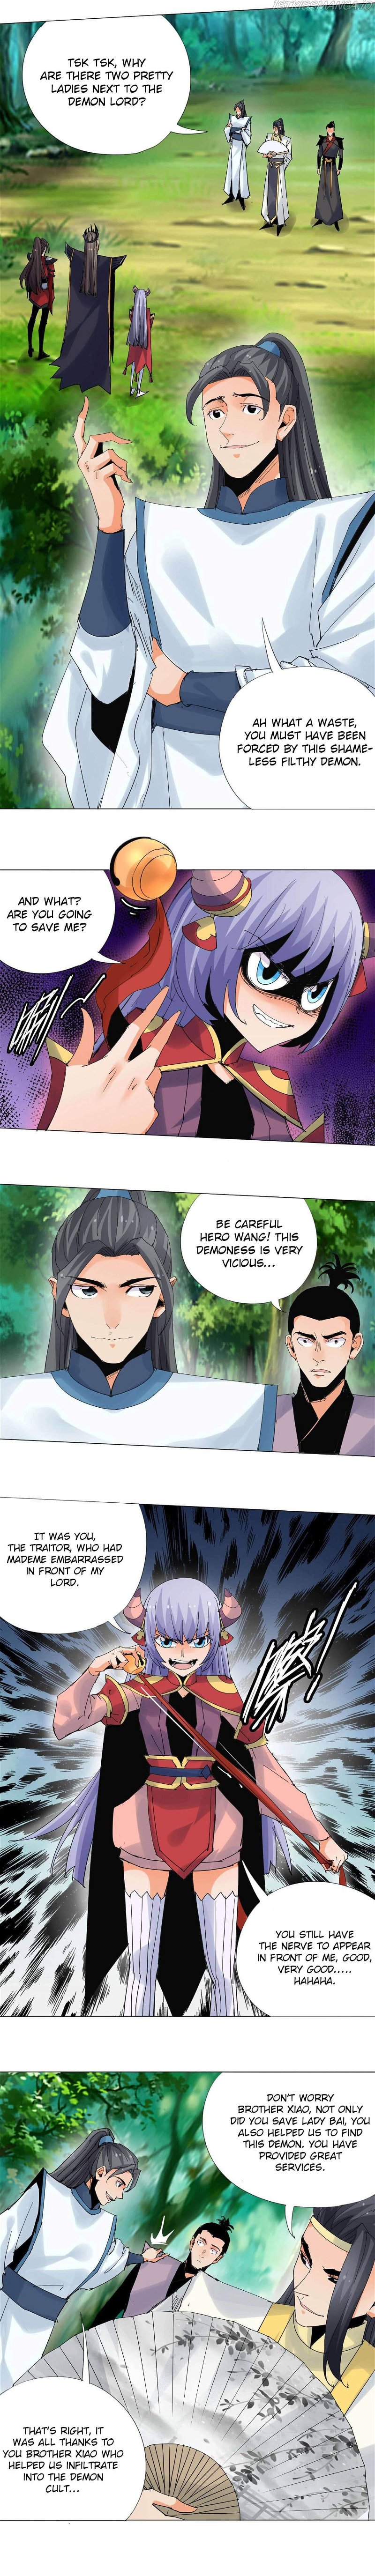 Martial arts villain Chapter 9 - Page 1